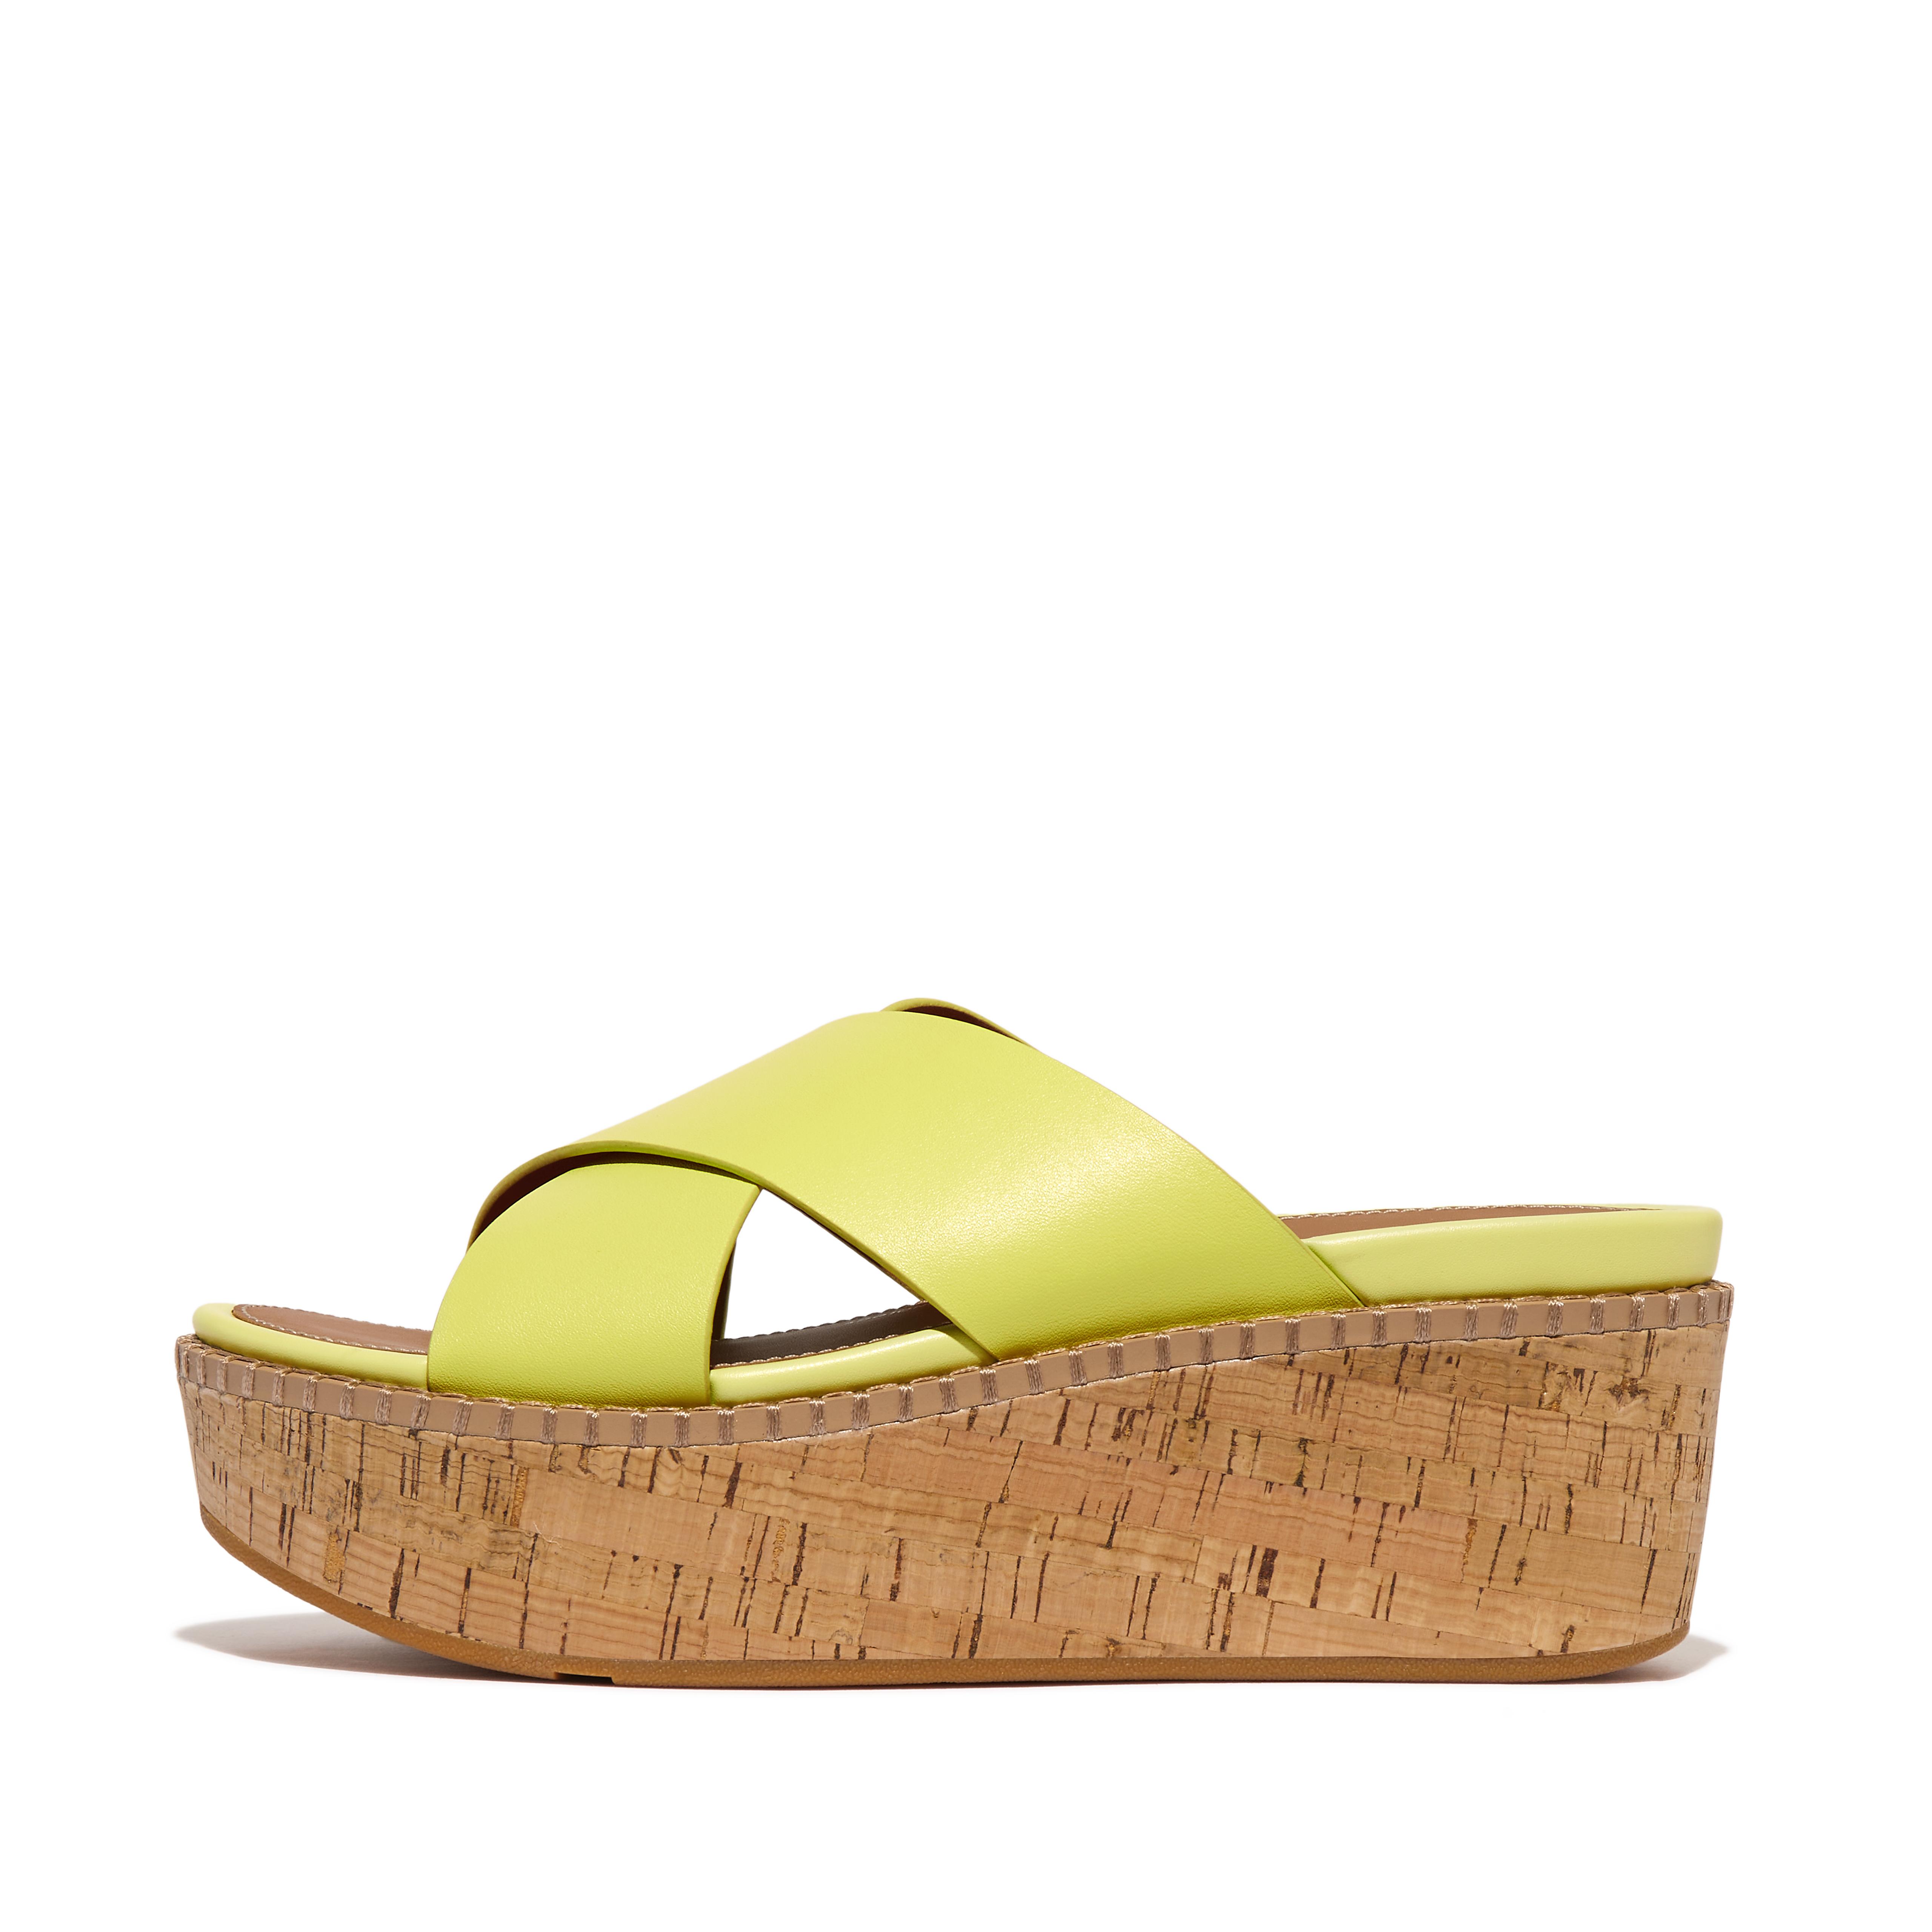 Fitflop Leather/Cork Wedge Cross Slides,Sunny Lime